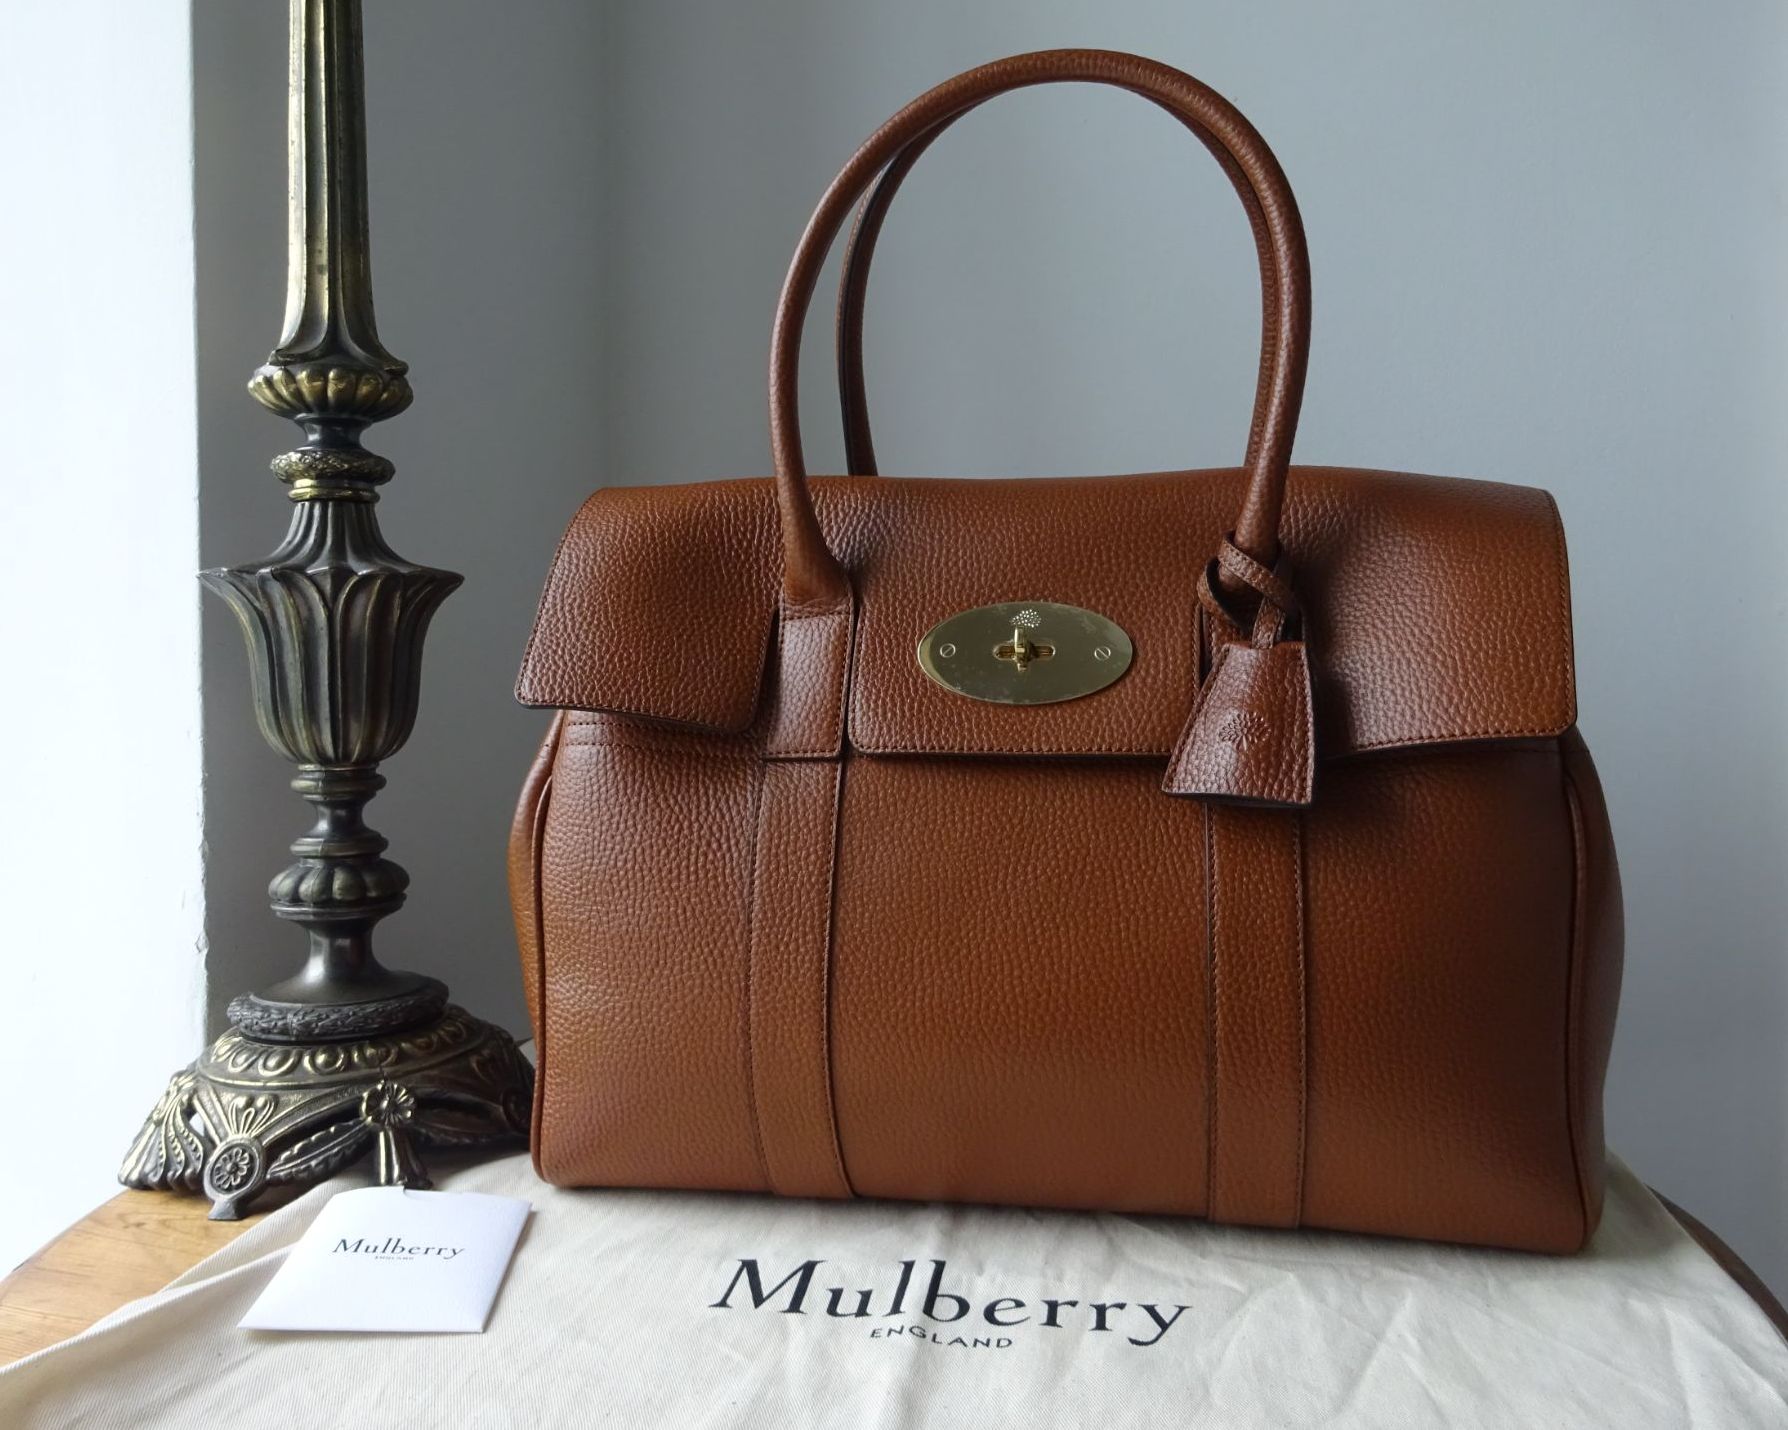 Mulberry Classic Bayswater in Oak Grain Vegetable Tanned